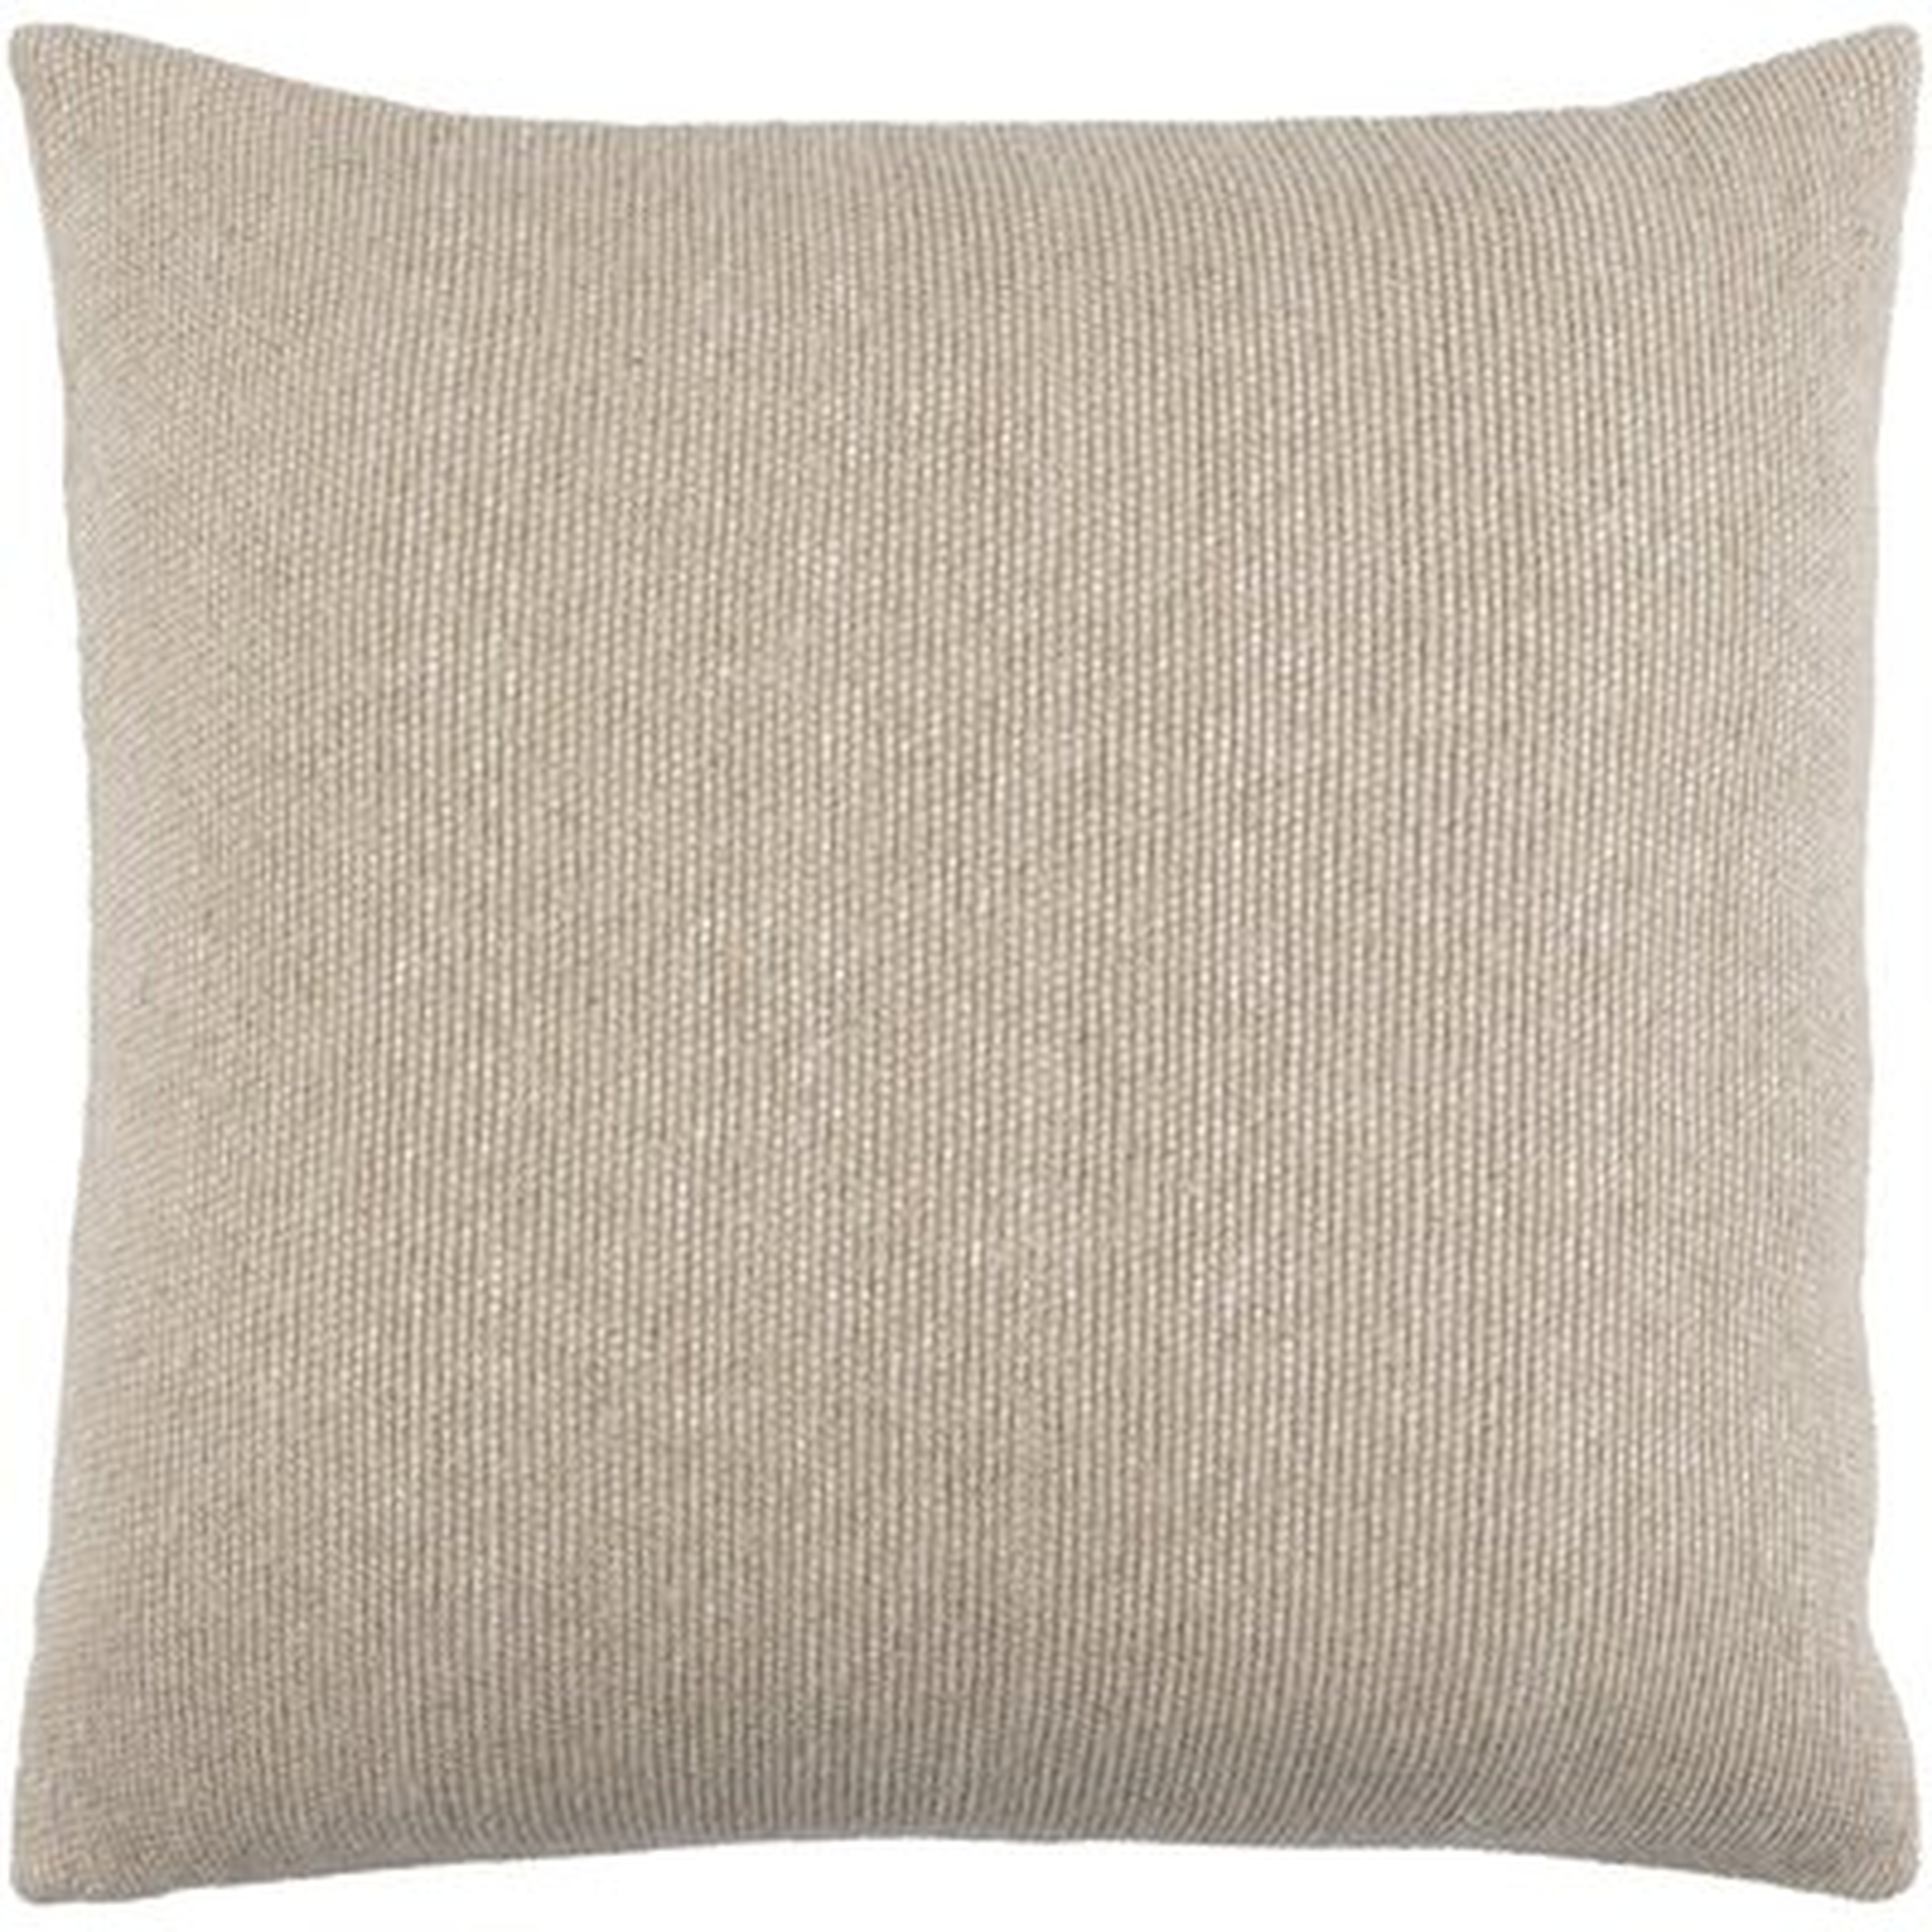 Wenlock Square Pillow Cover - Wayfair